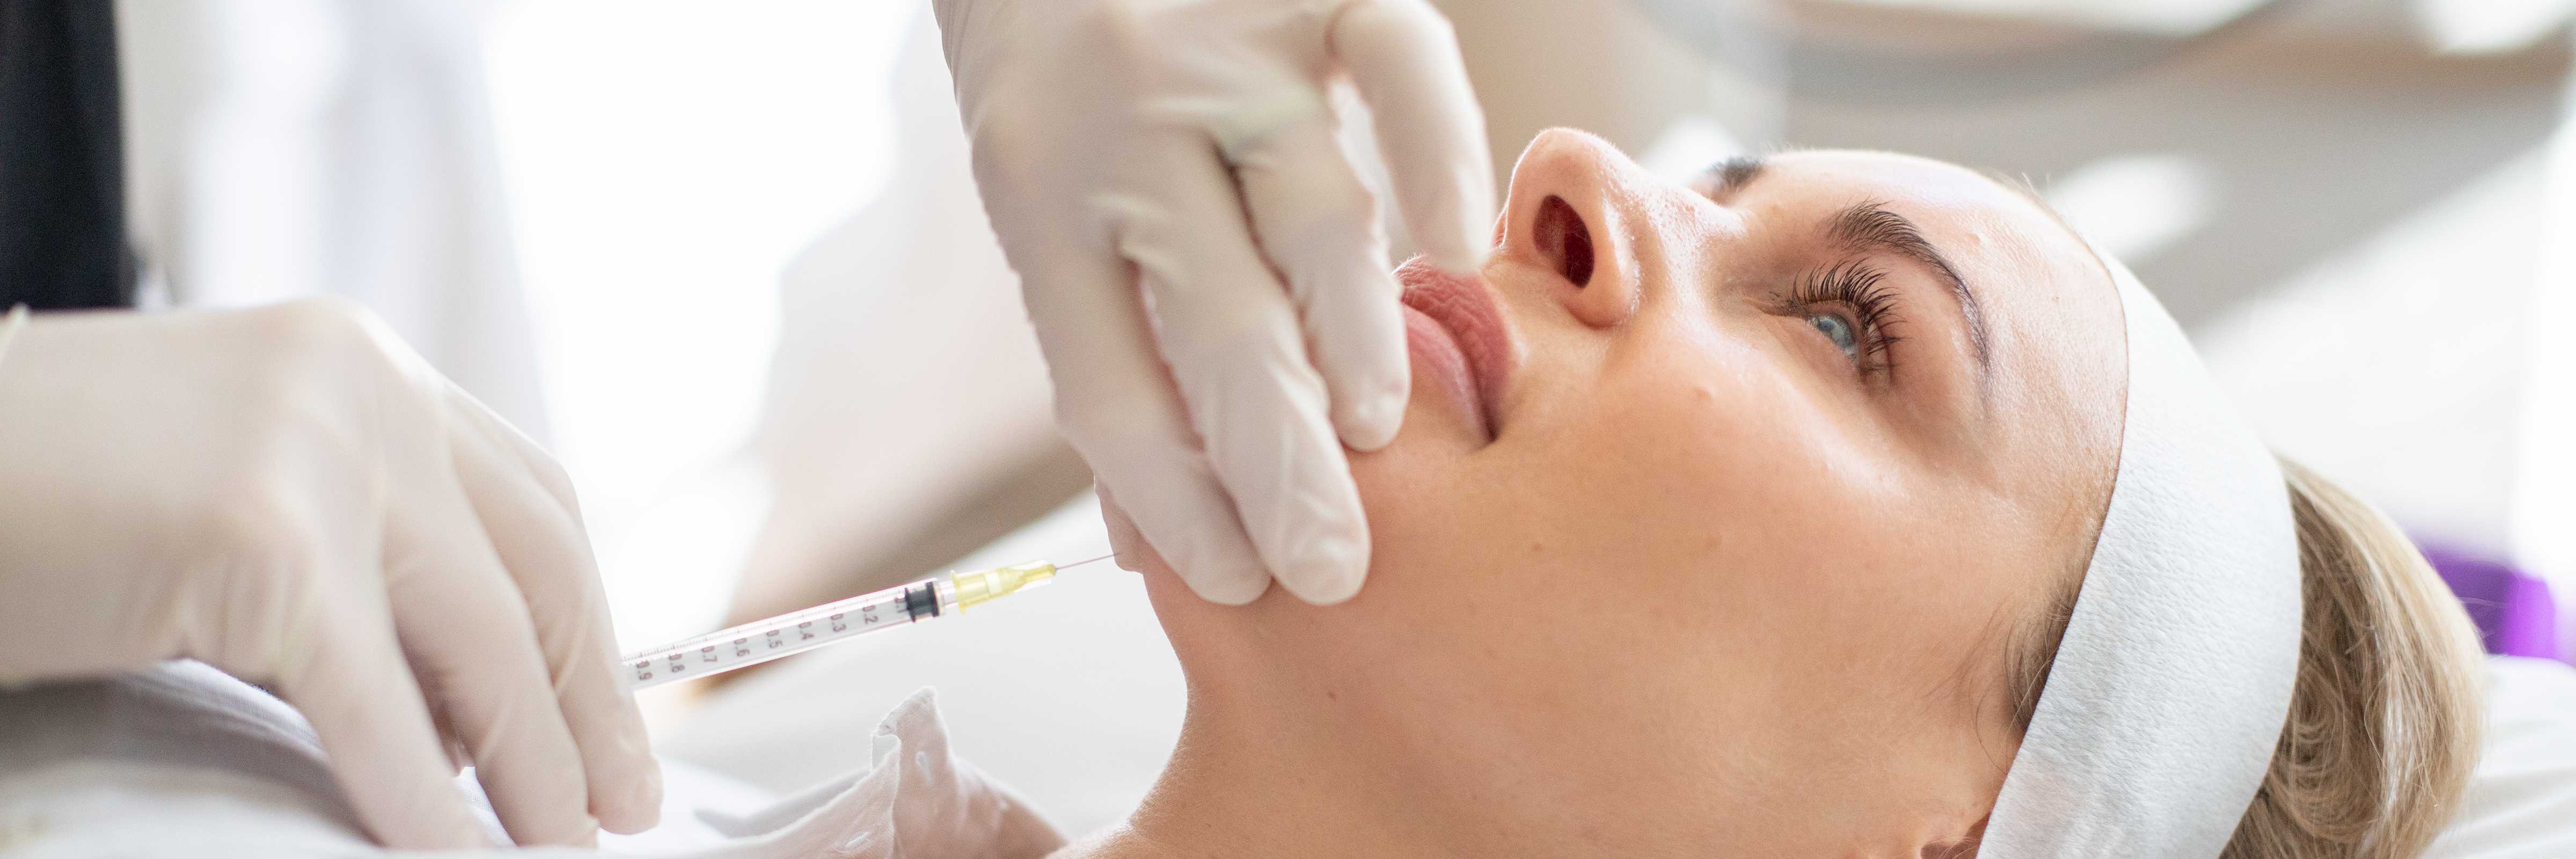 Woman receiving a double chin injection.